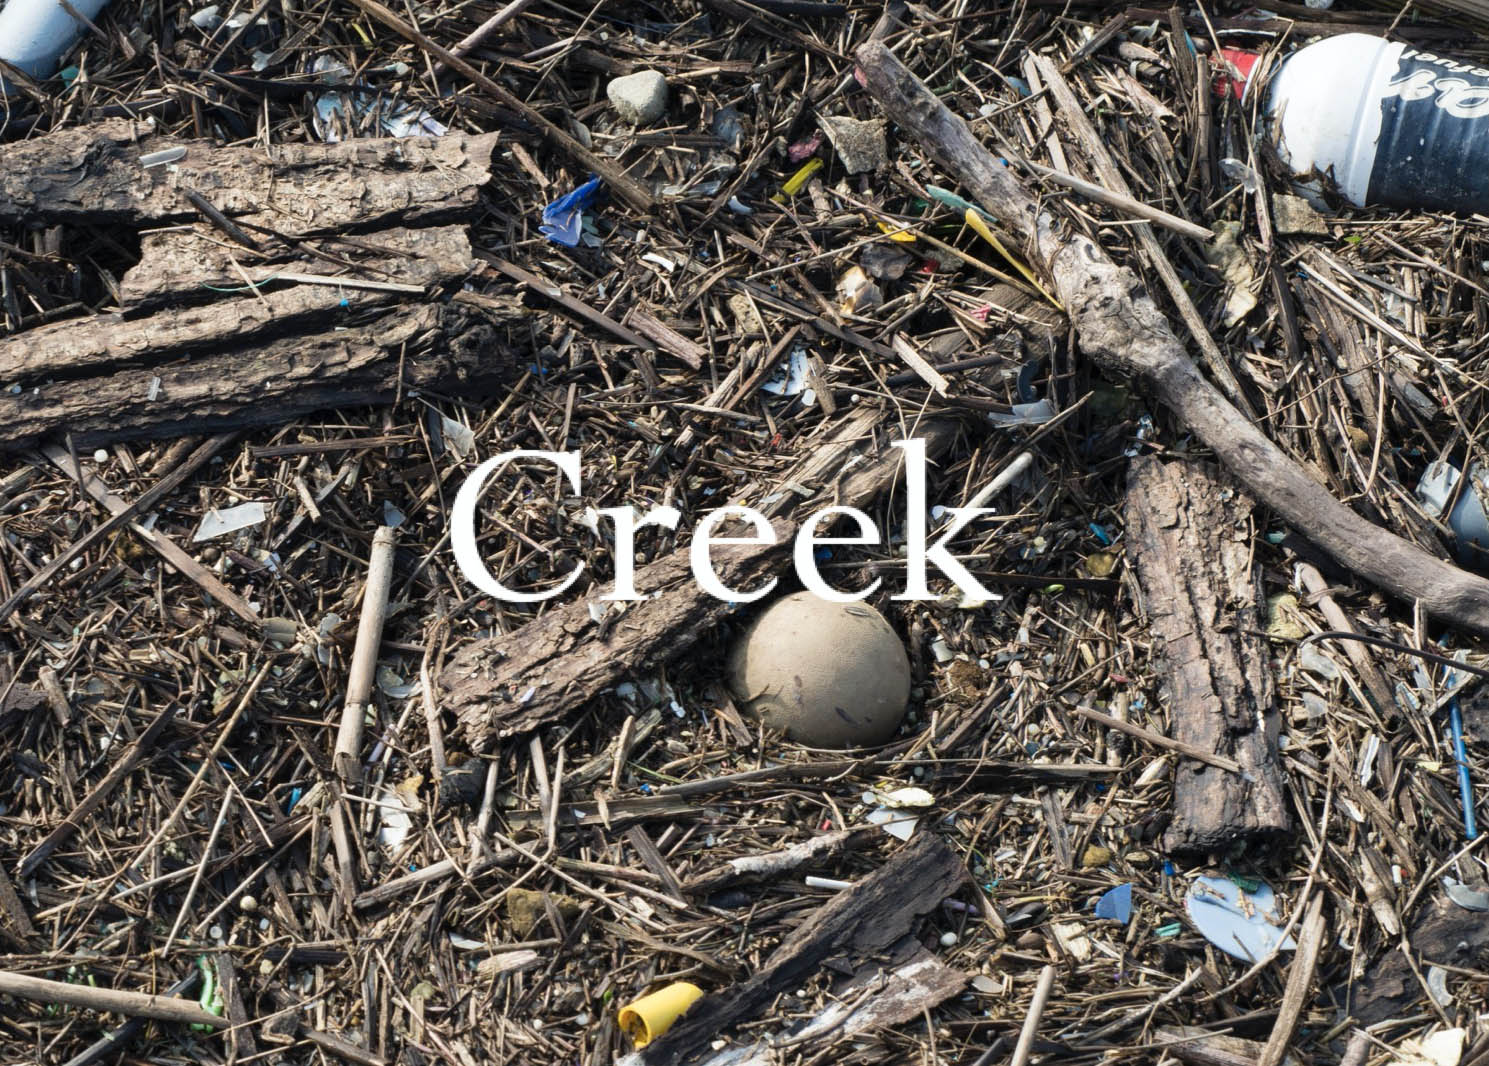 The cover shows the title of the book against a background of river-borne detritus